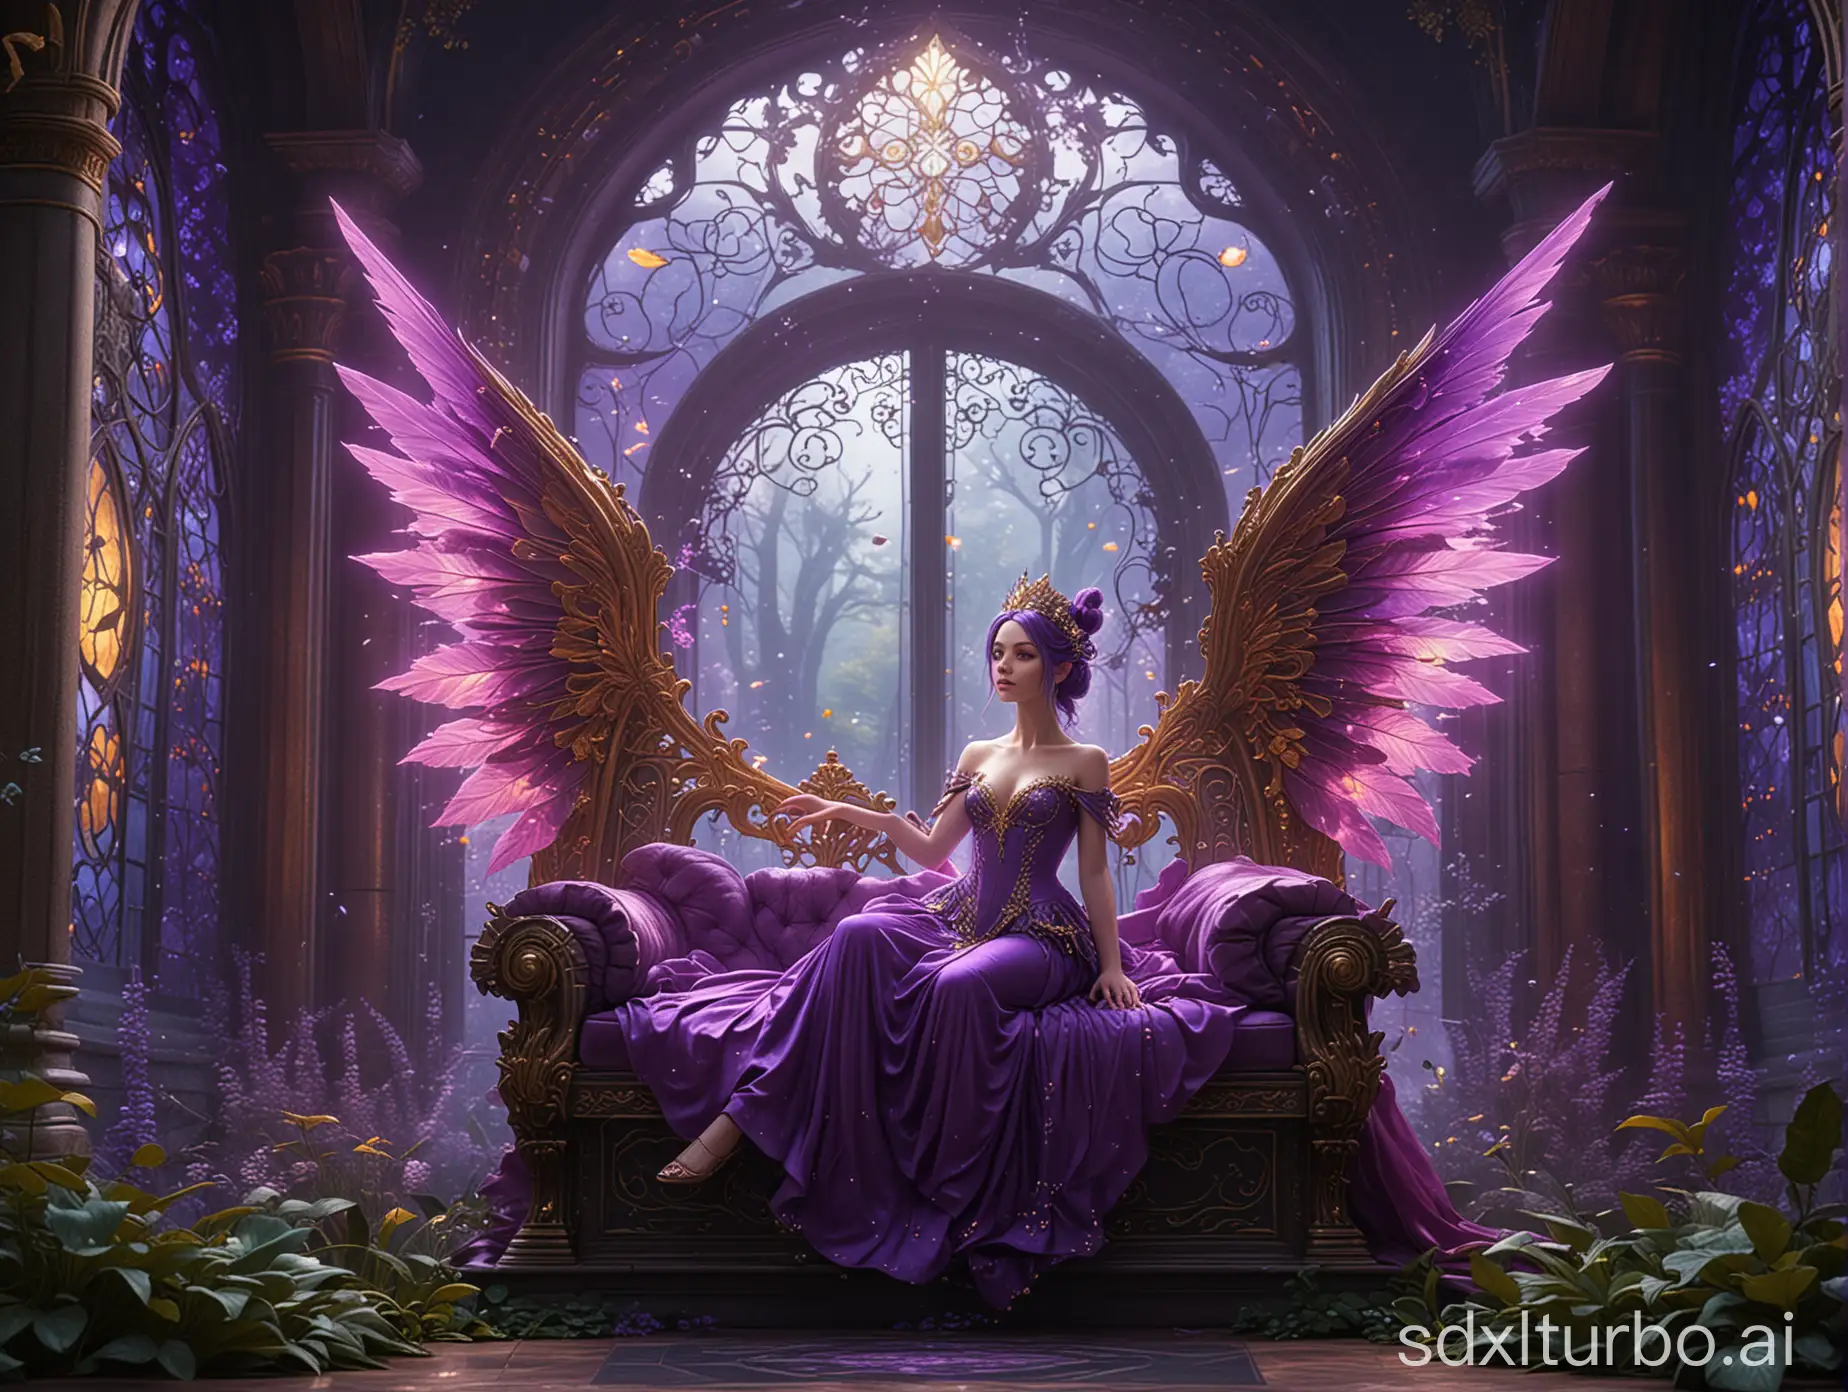 A stunning 3D render of a vibrant fairy in a palace, sitting gracefully on a massive, ornate throne. Her wings are a brilliant shade of purple, and her attire is adorned with gold and gemstones. In the background, another fairy gazes through a large window, with the enchanting forest beyond, filled with ethereal creatures and mystical plants. The overall atmosphere of the illustration is a blend of dark fantasy and vivid colors, creating a captivating scene., illustration, anime, dark fantasy, vibrant, 3d render